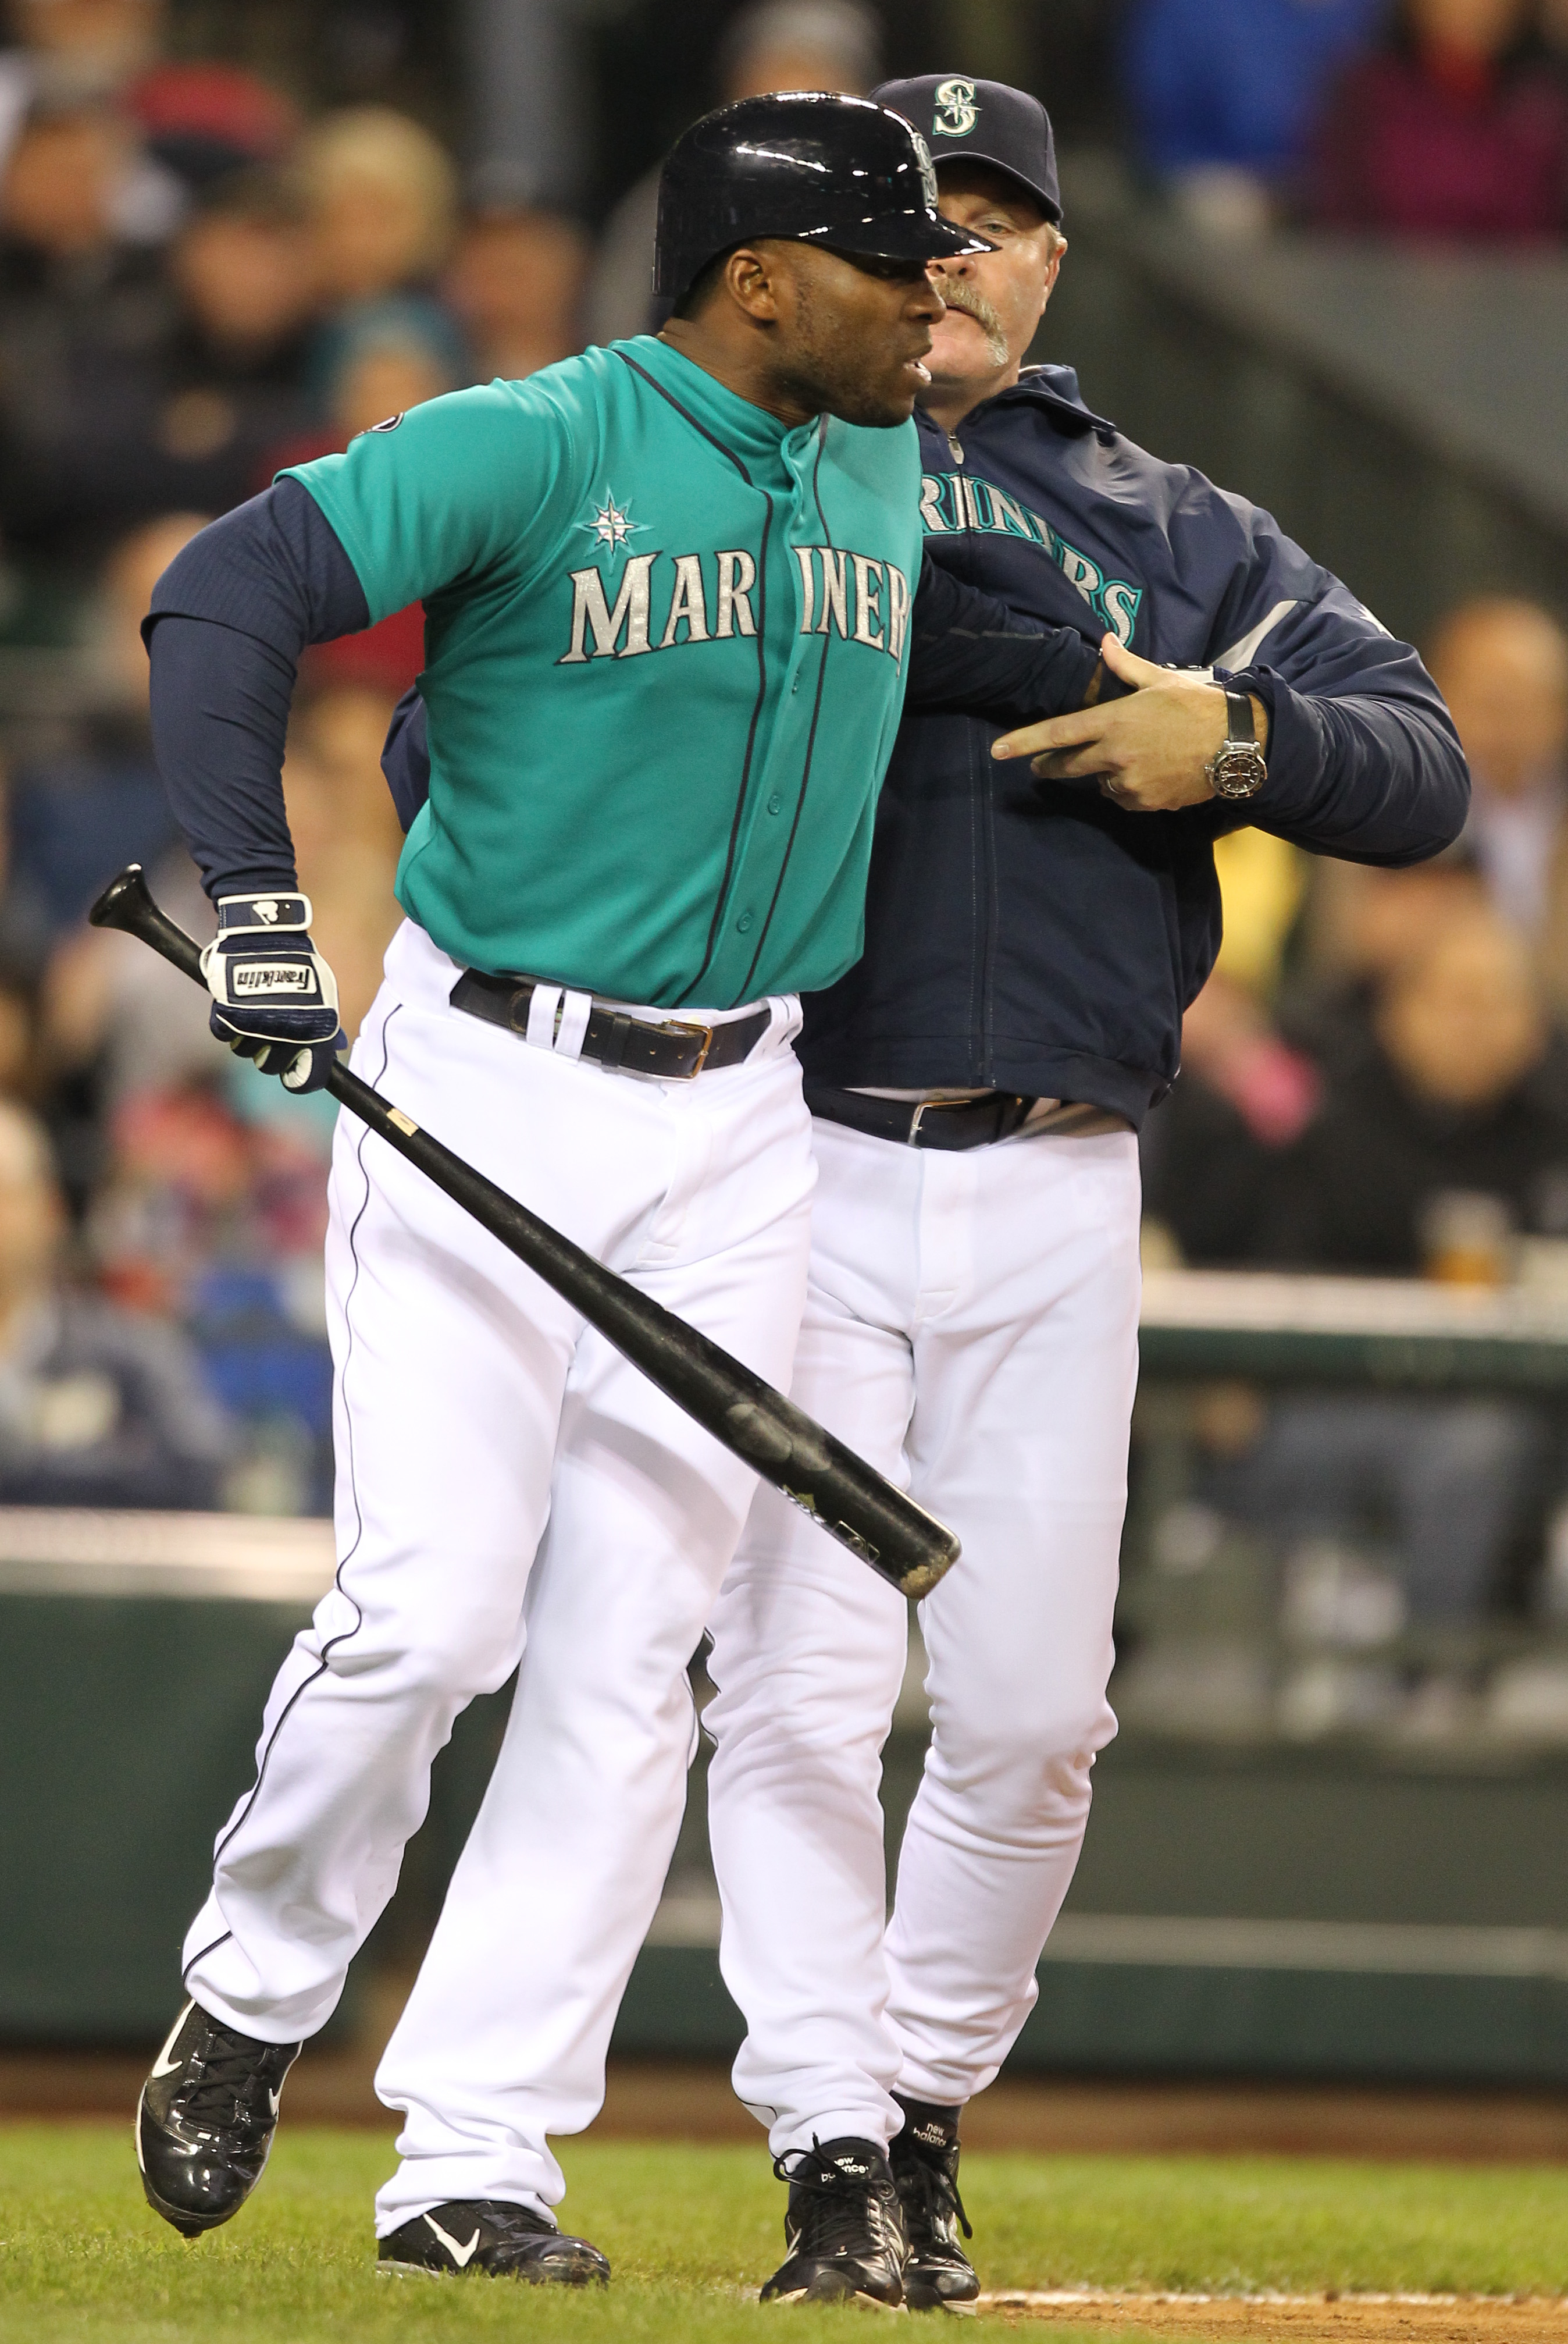 SEATTLE - MAY 06:  Milton Bradley #15 of the Seattle Mariners is restrained by manager Eric Wedge #22 after being ejected from the game against the Chicago White Sox at Safeco Field on May 6, 2011 in Seattle, Washington. The Mariners won 3-2. (Photo by Ot